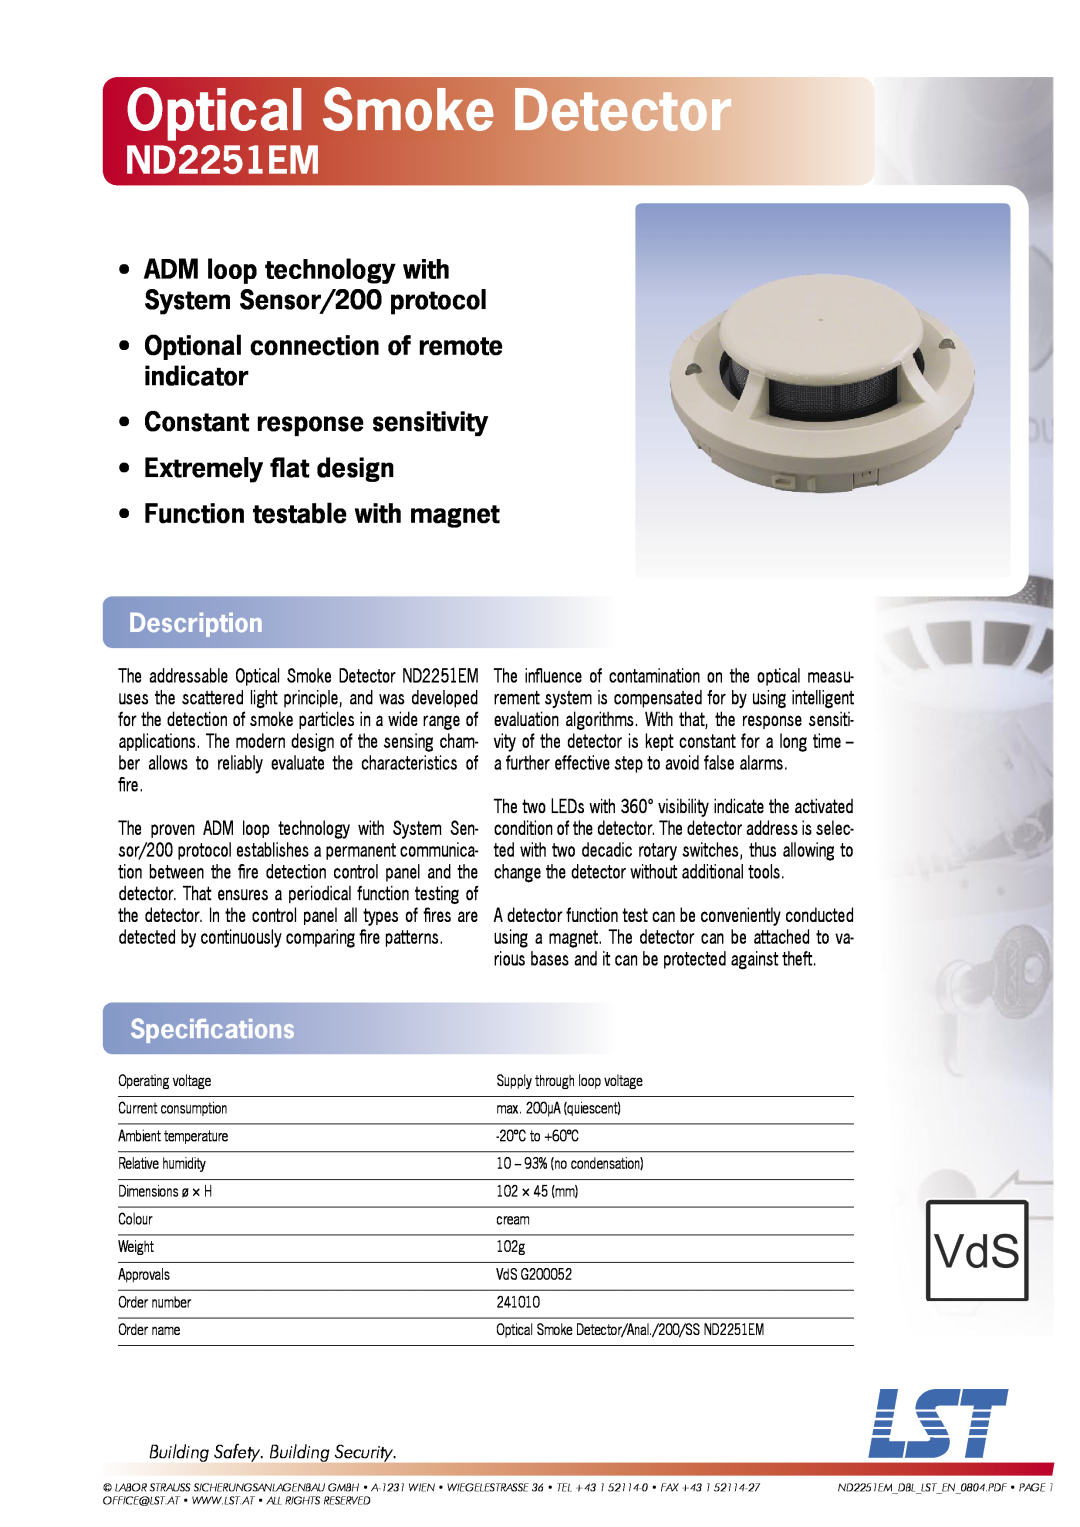 LST ND2251EM specifications Optical Smoke Detector, Optional connection of remote indicator, Constant response sensitivity 